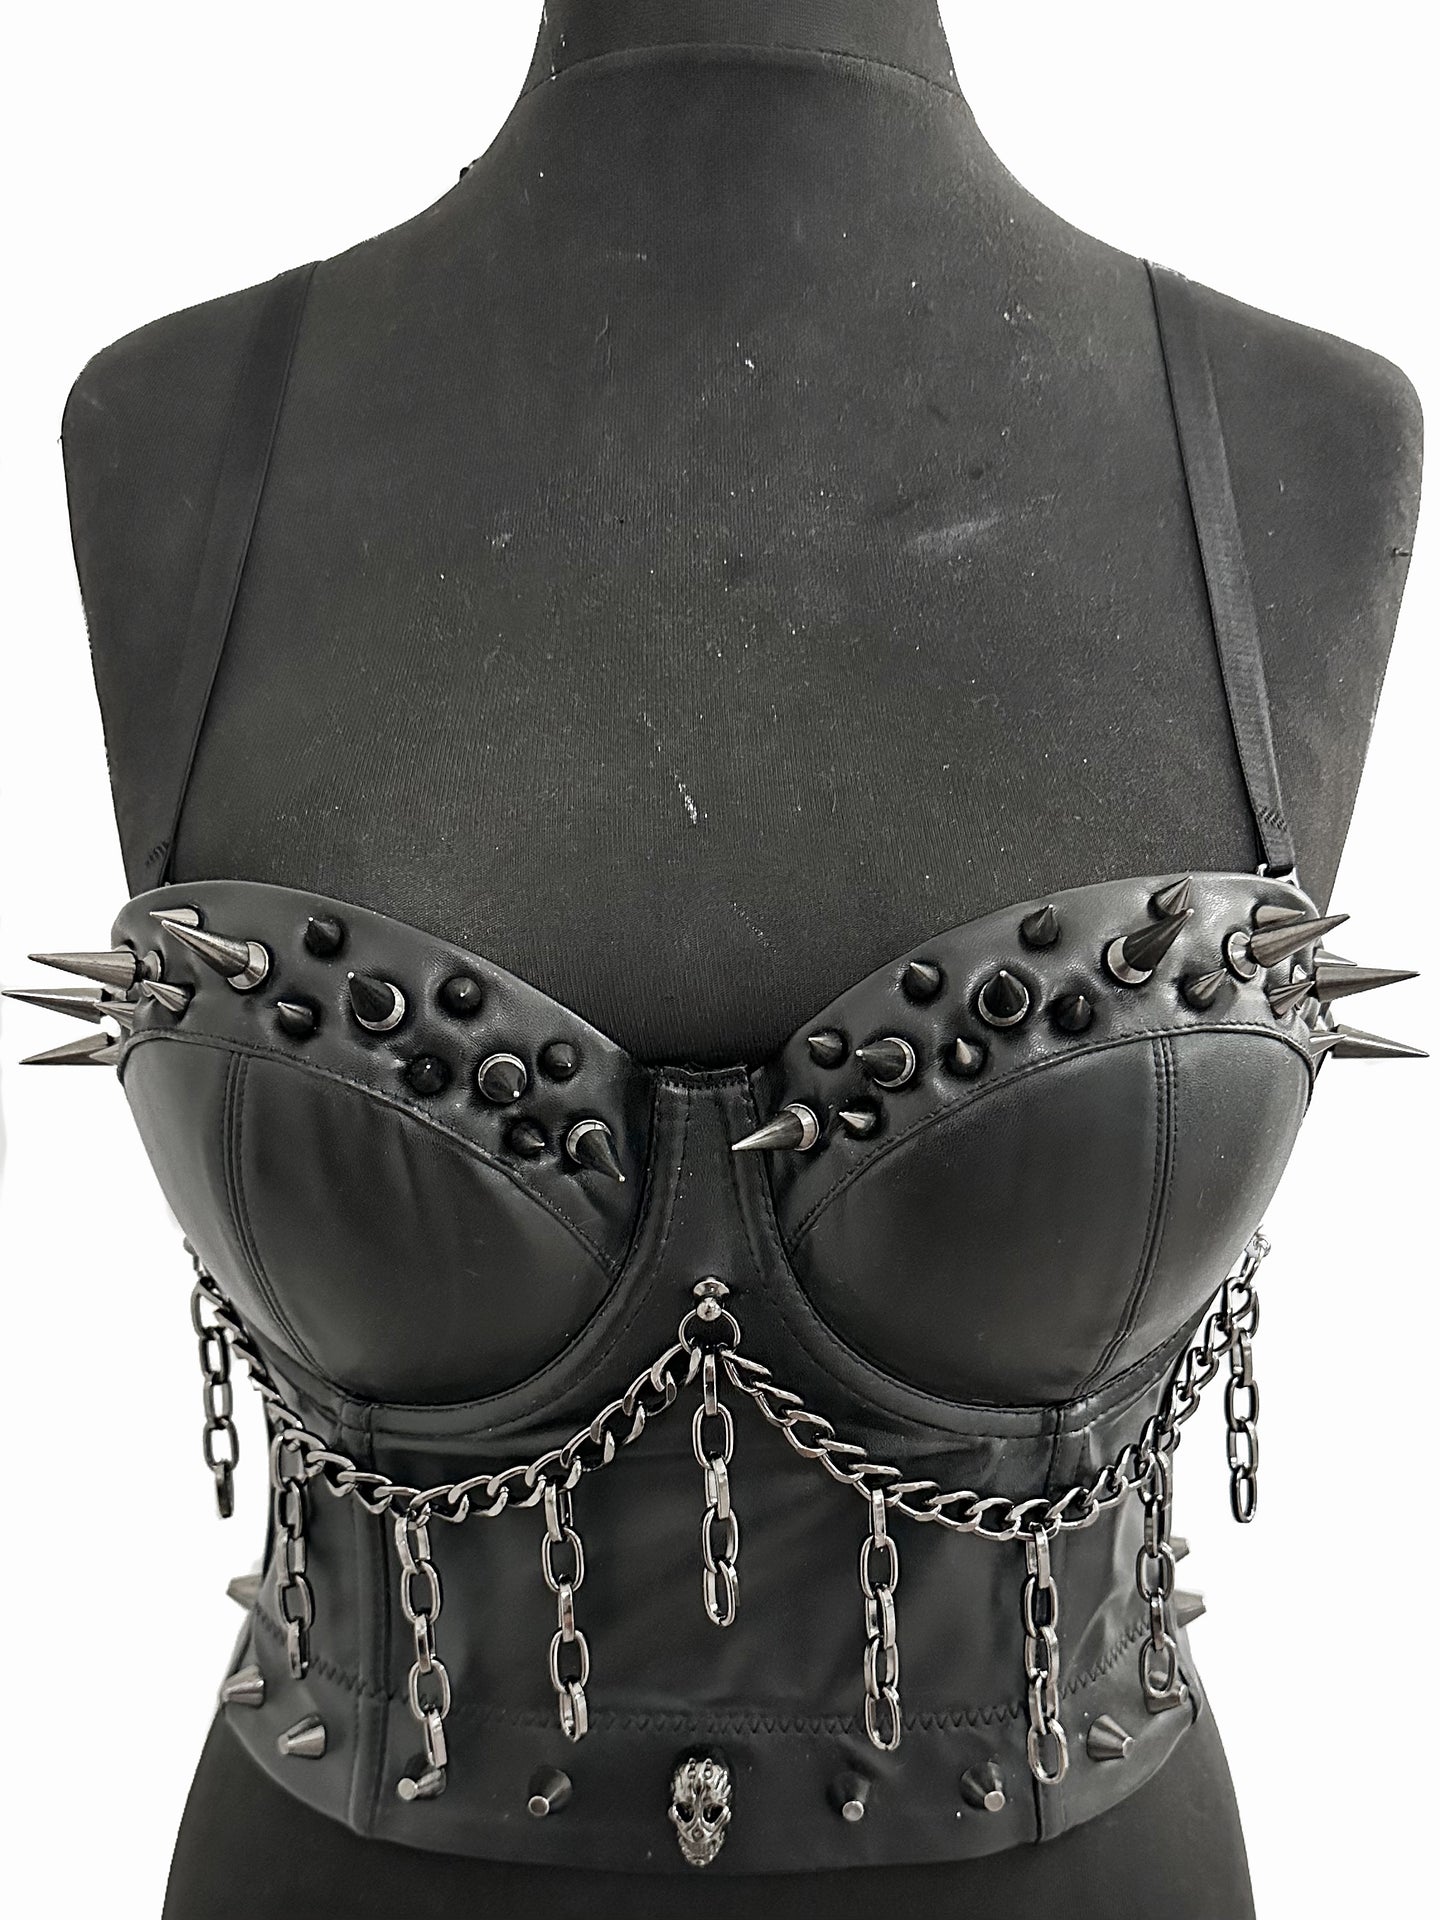 CLASSIC SPIKED BUSTIER